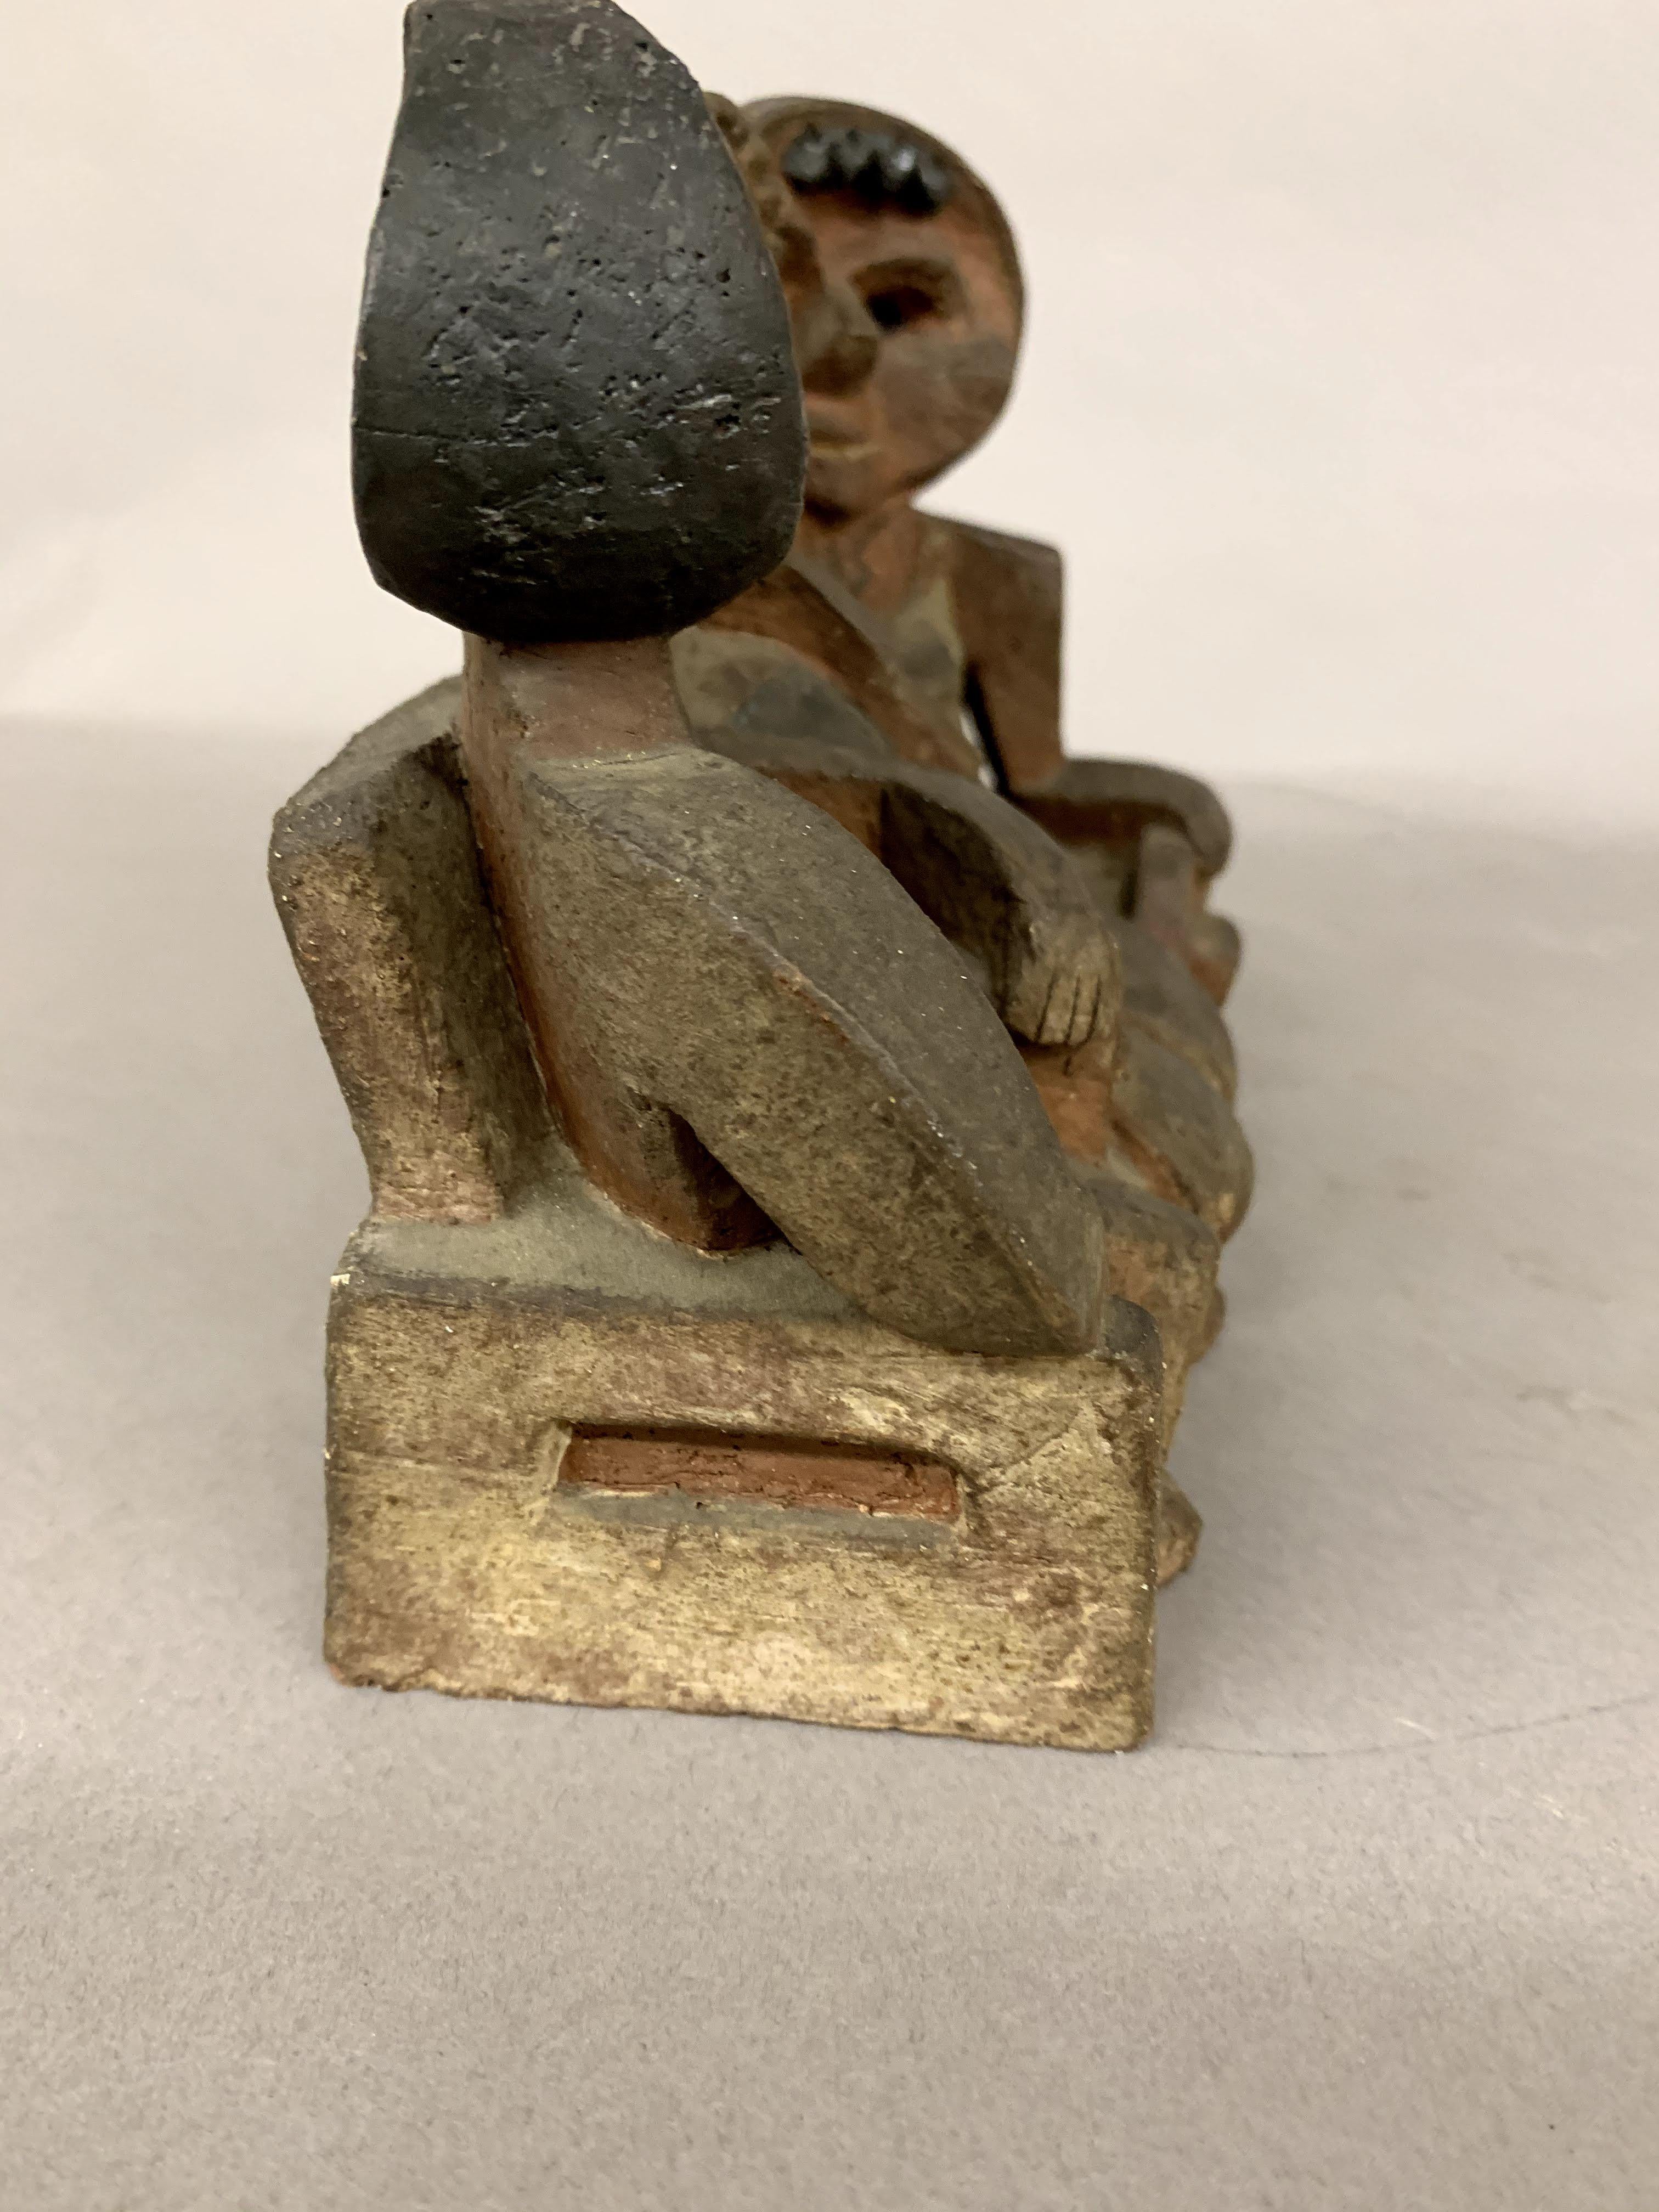 A rare early figural work by well-known American Modernist ceramic artist Marilyn Fox (20th c). Her figurative & abstract ceramic works, often hand-built, using slab clay construction, are held in many private, as well as public collections. The